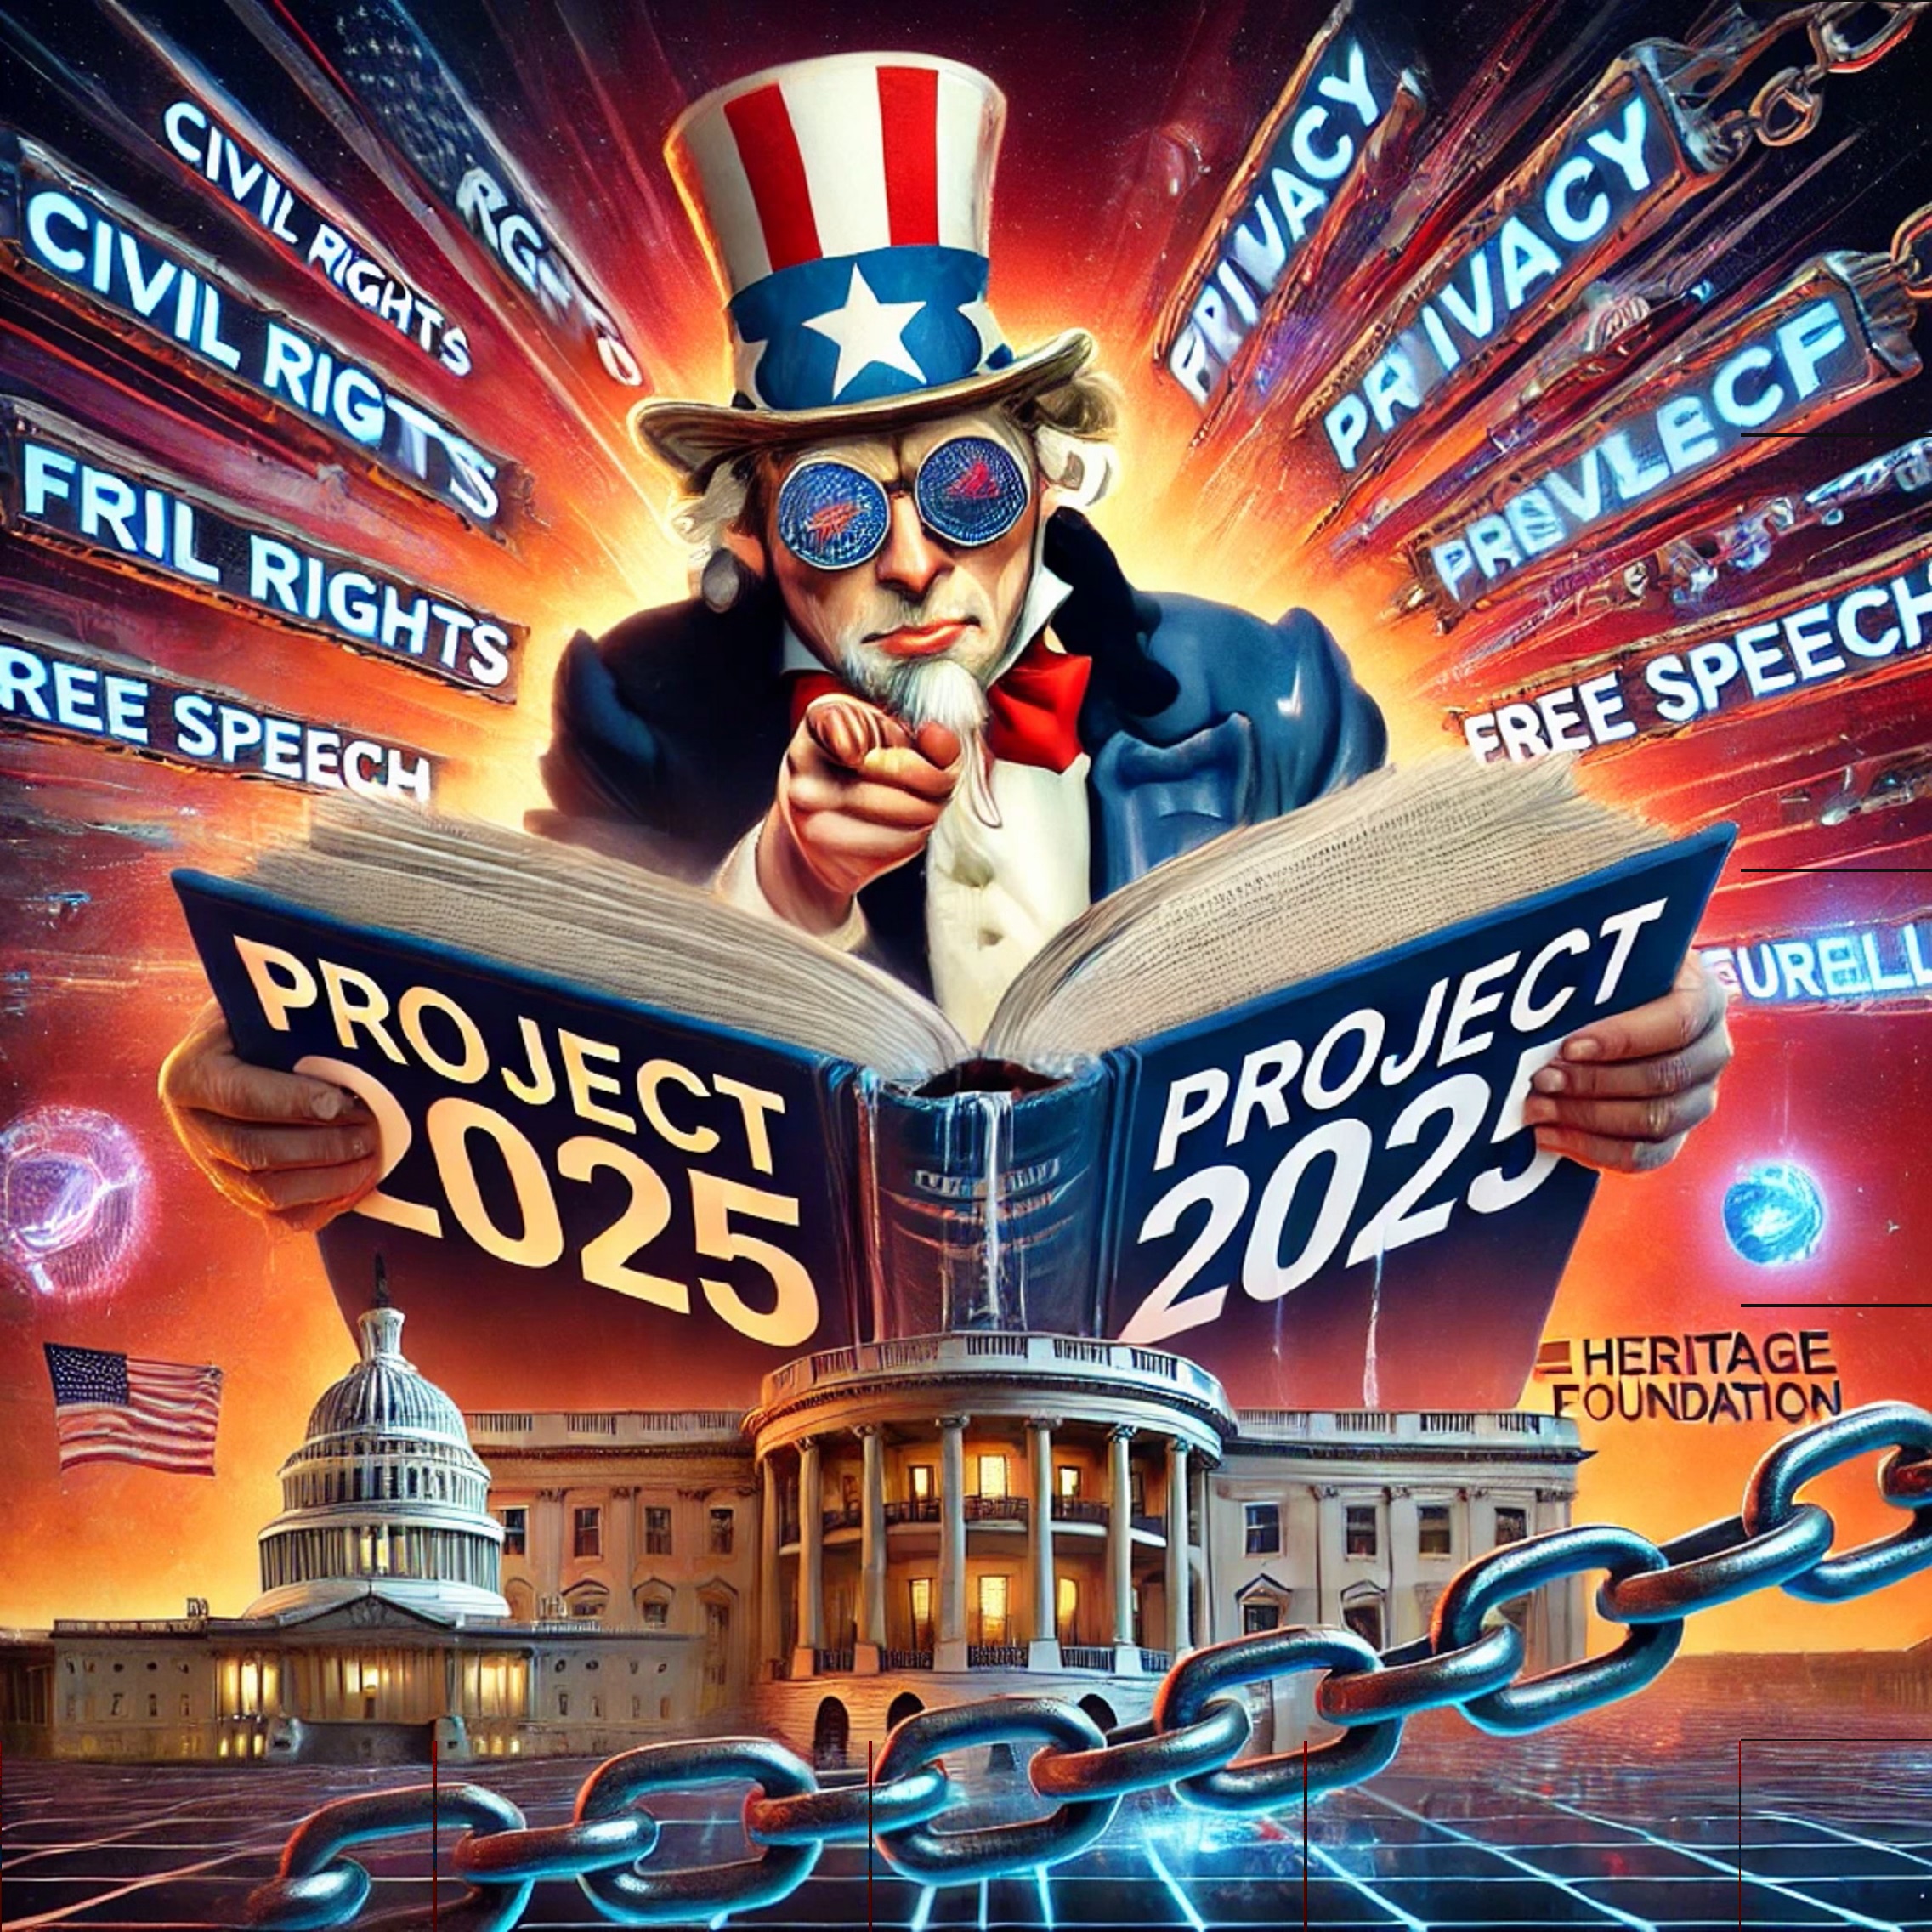 Project 2025: A War on Porn, Privacy, and Progress